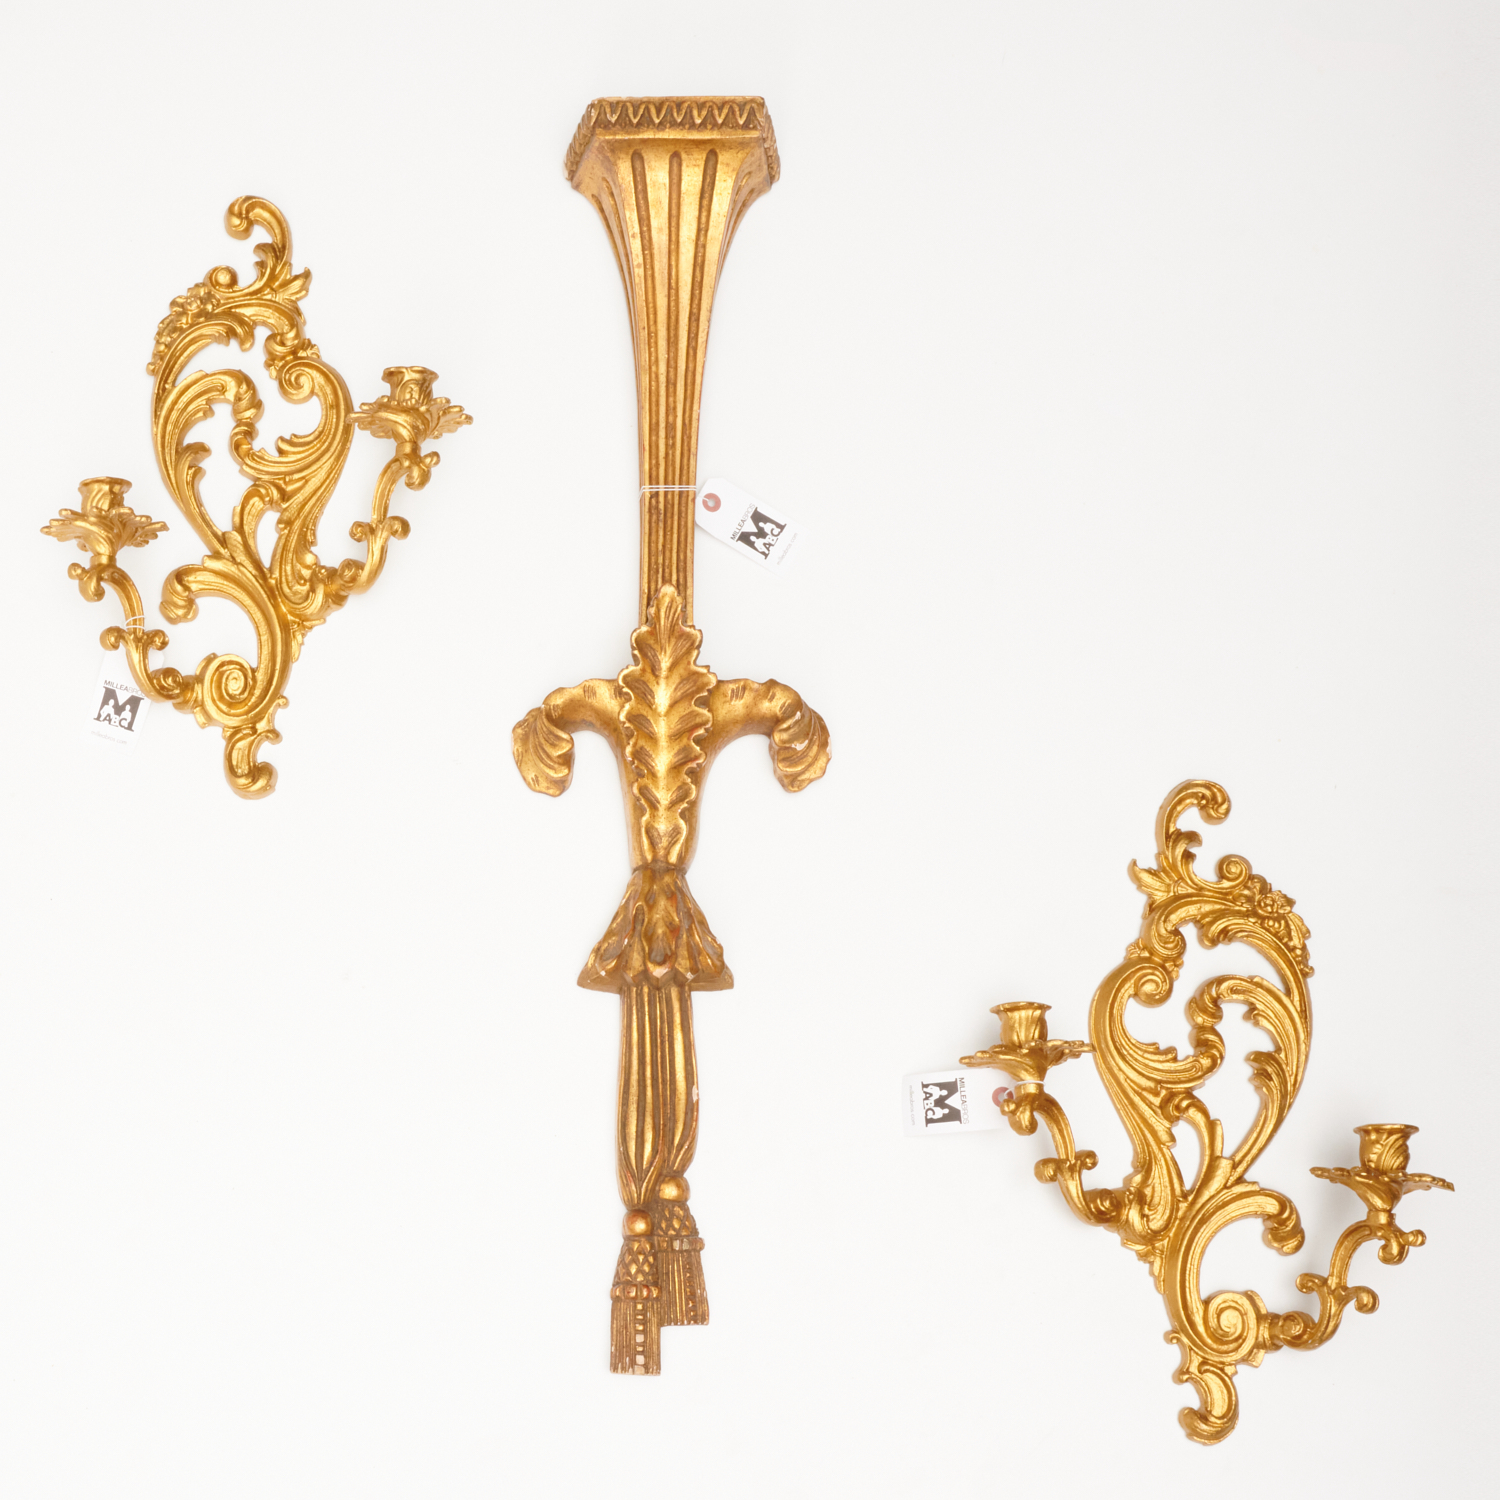 PAIR ROCOCO STYLE SCONCES AND GILTWOOD 2ce29e